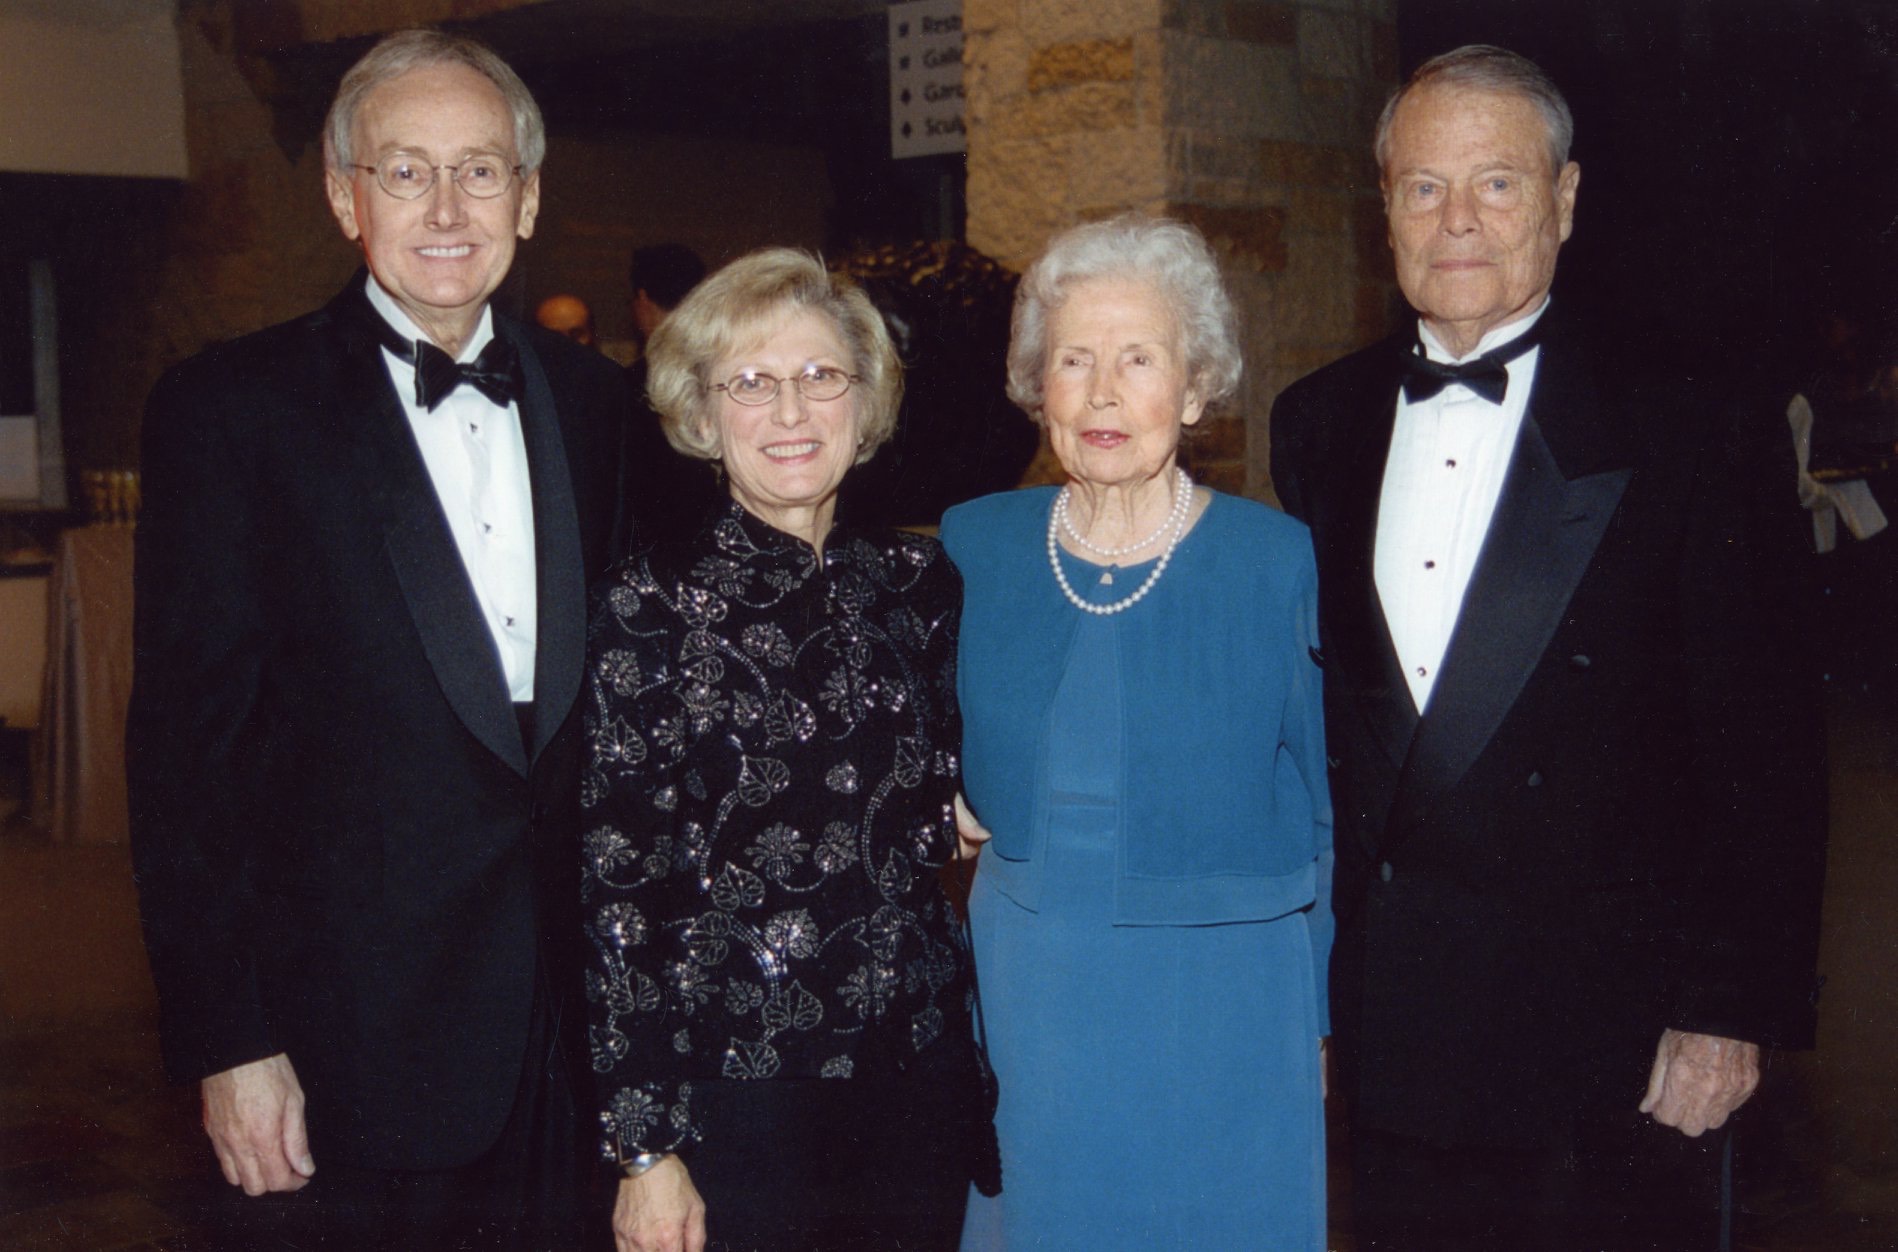 Ralph and Grace Hauenstein with friends